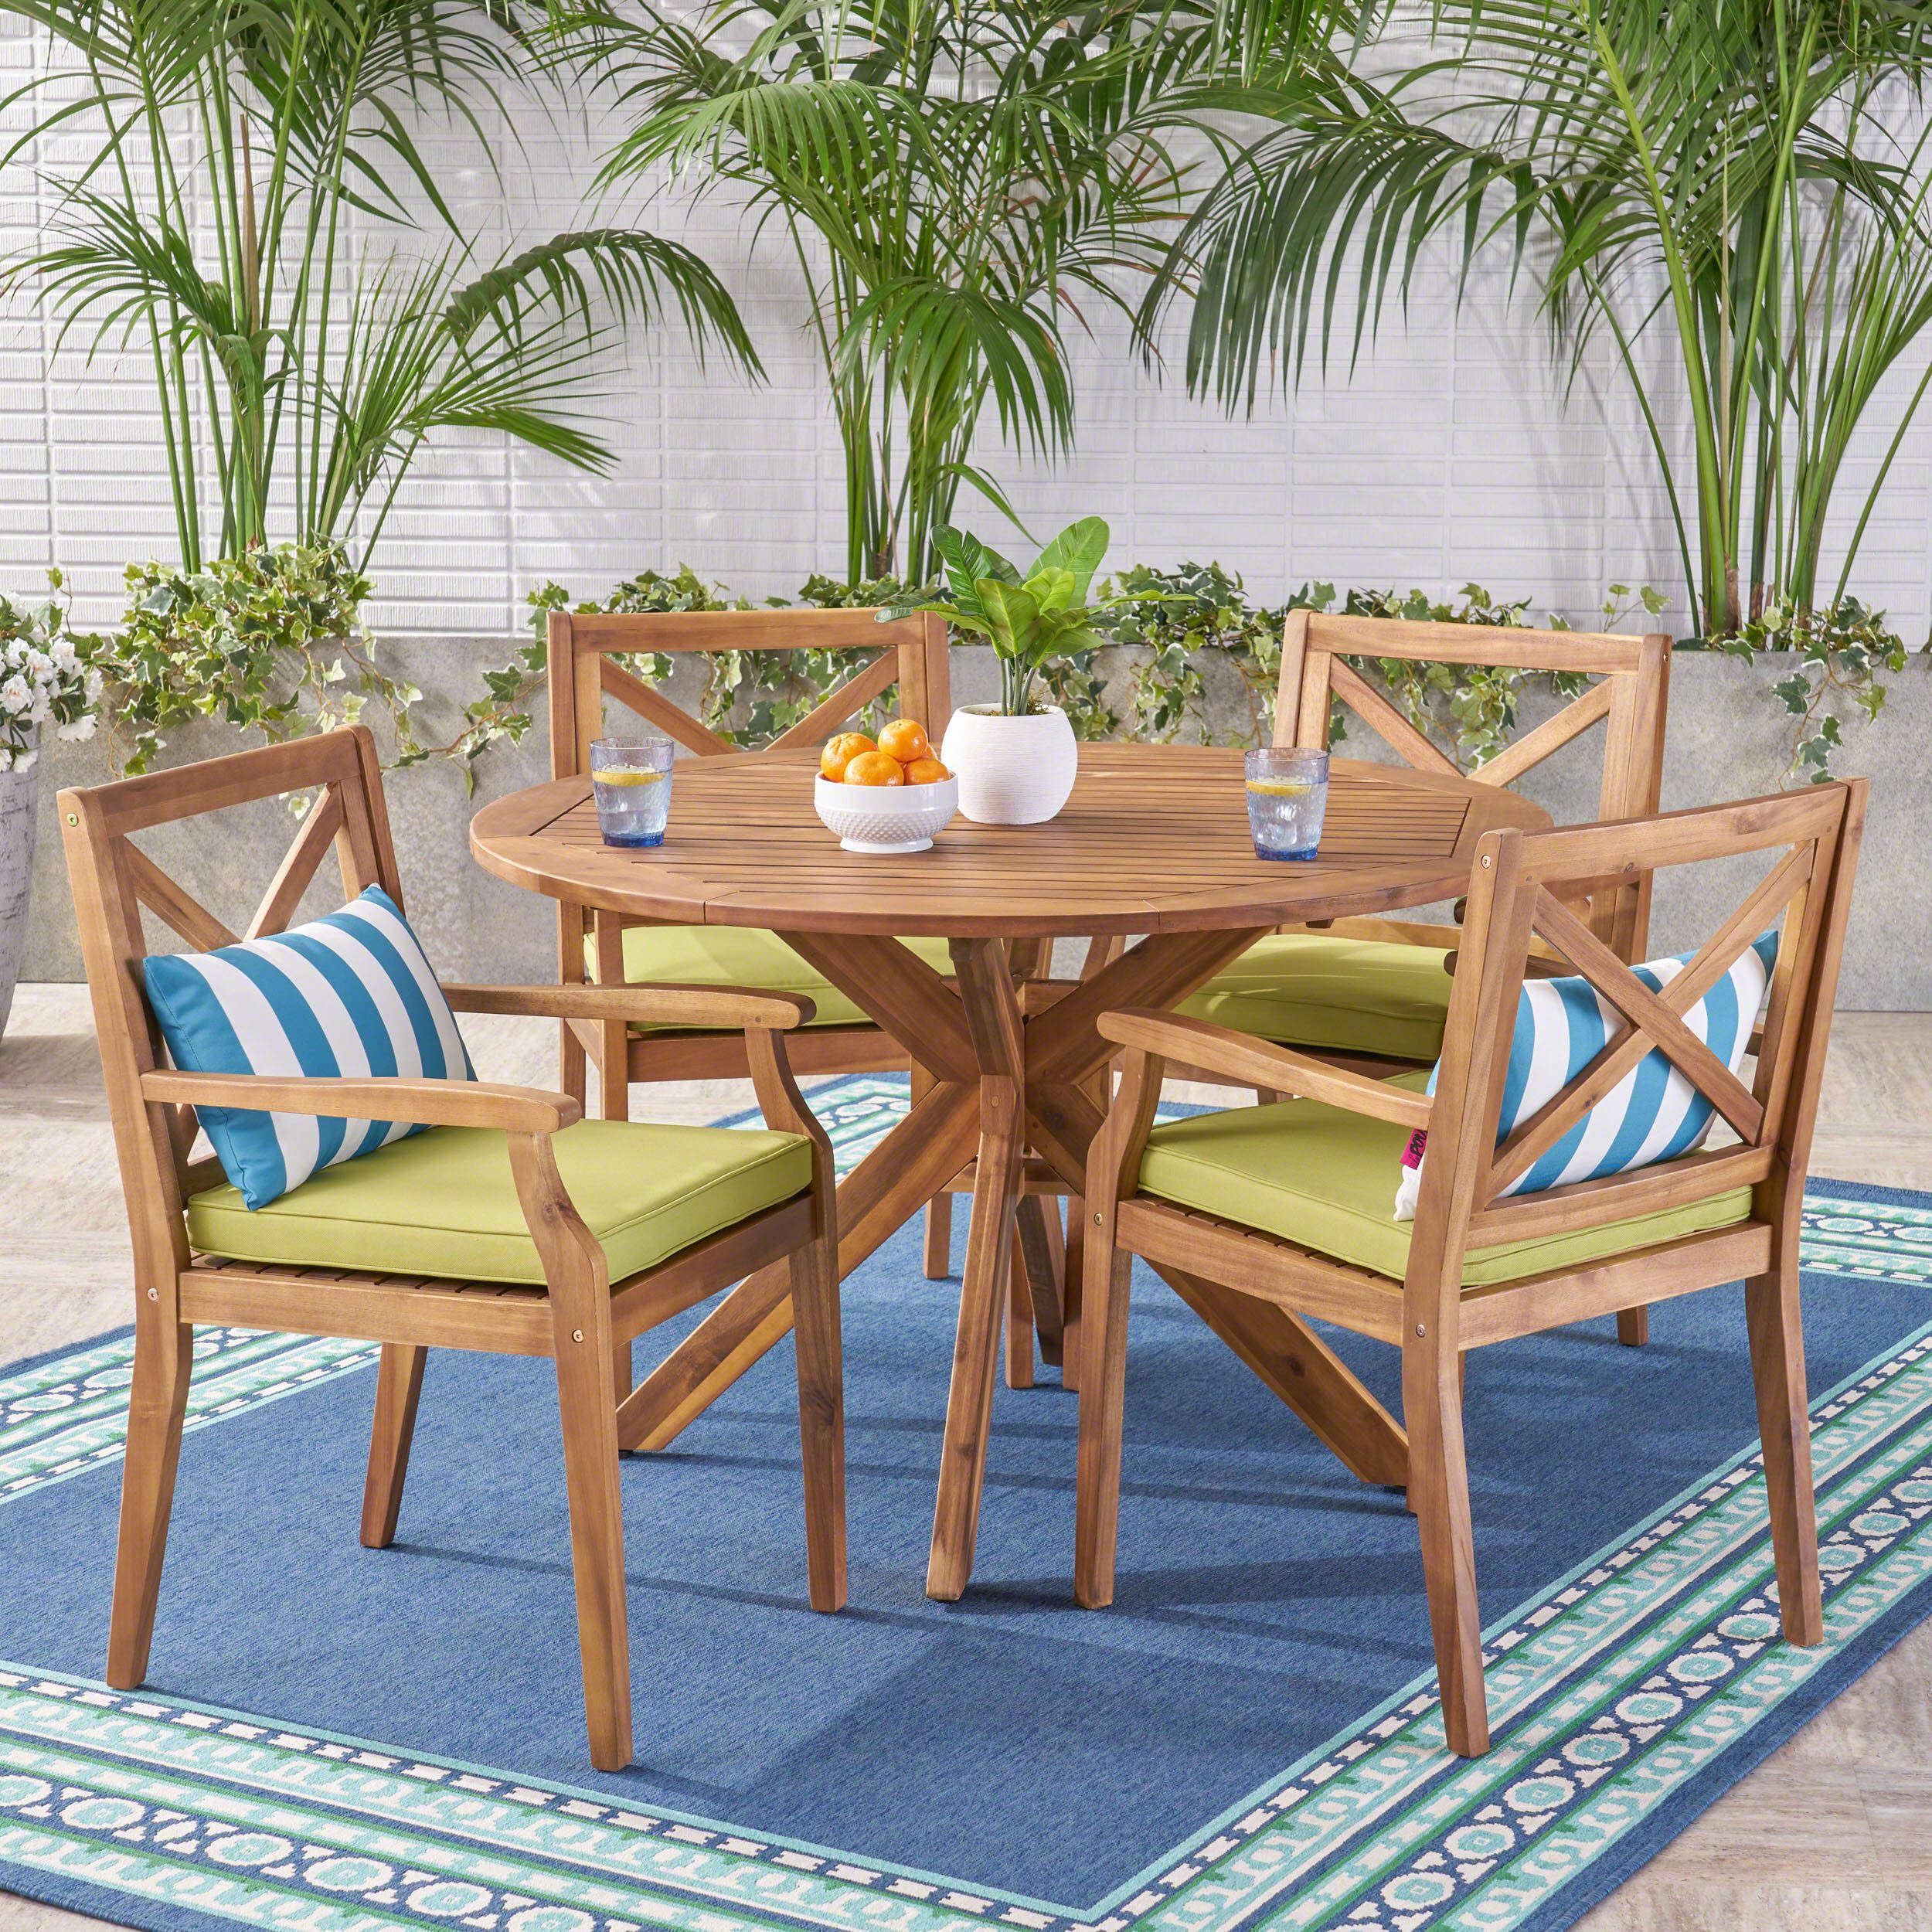 Oakley Outdoor 5 Piece Acacia Wood Round Dining Set With Cushions, Teak Intended For Acacia Wood Outdoor Seating Patio Sets (View 2 of 15)